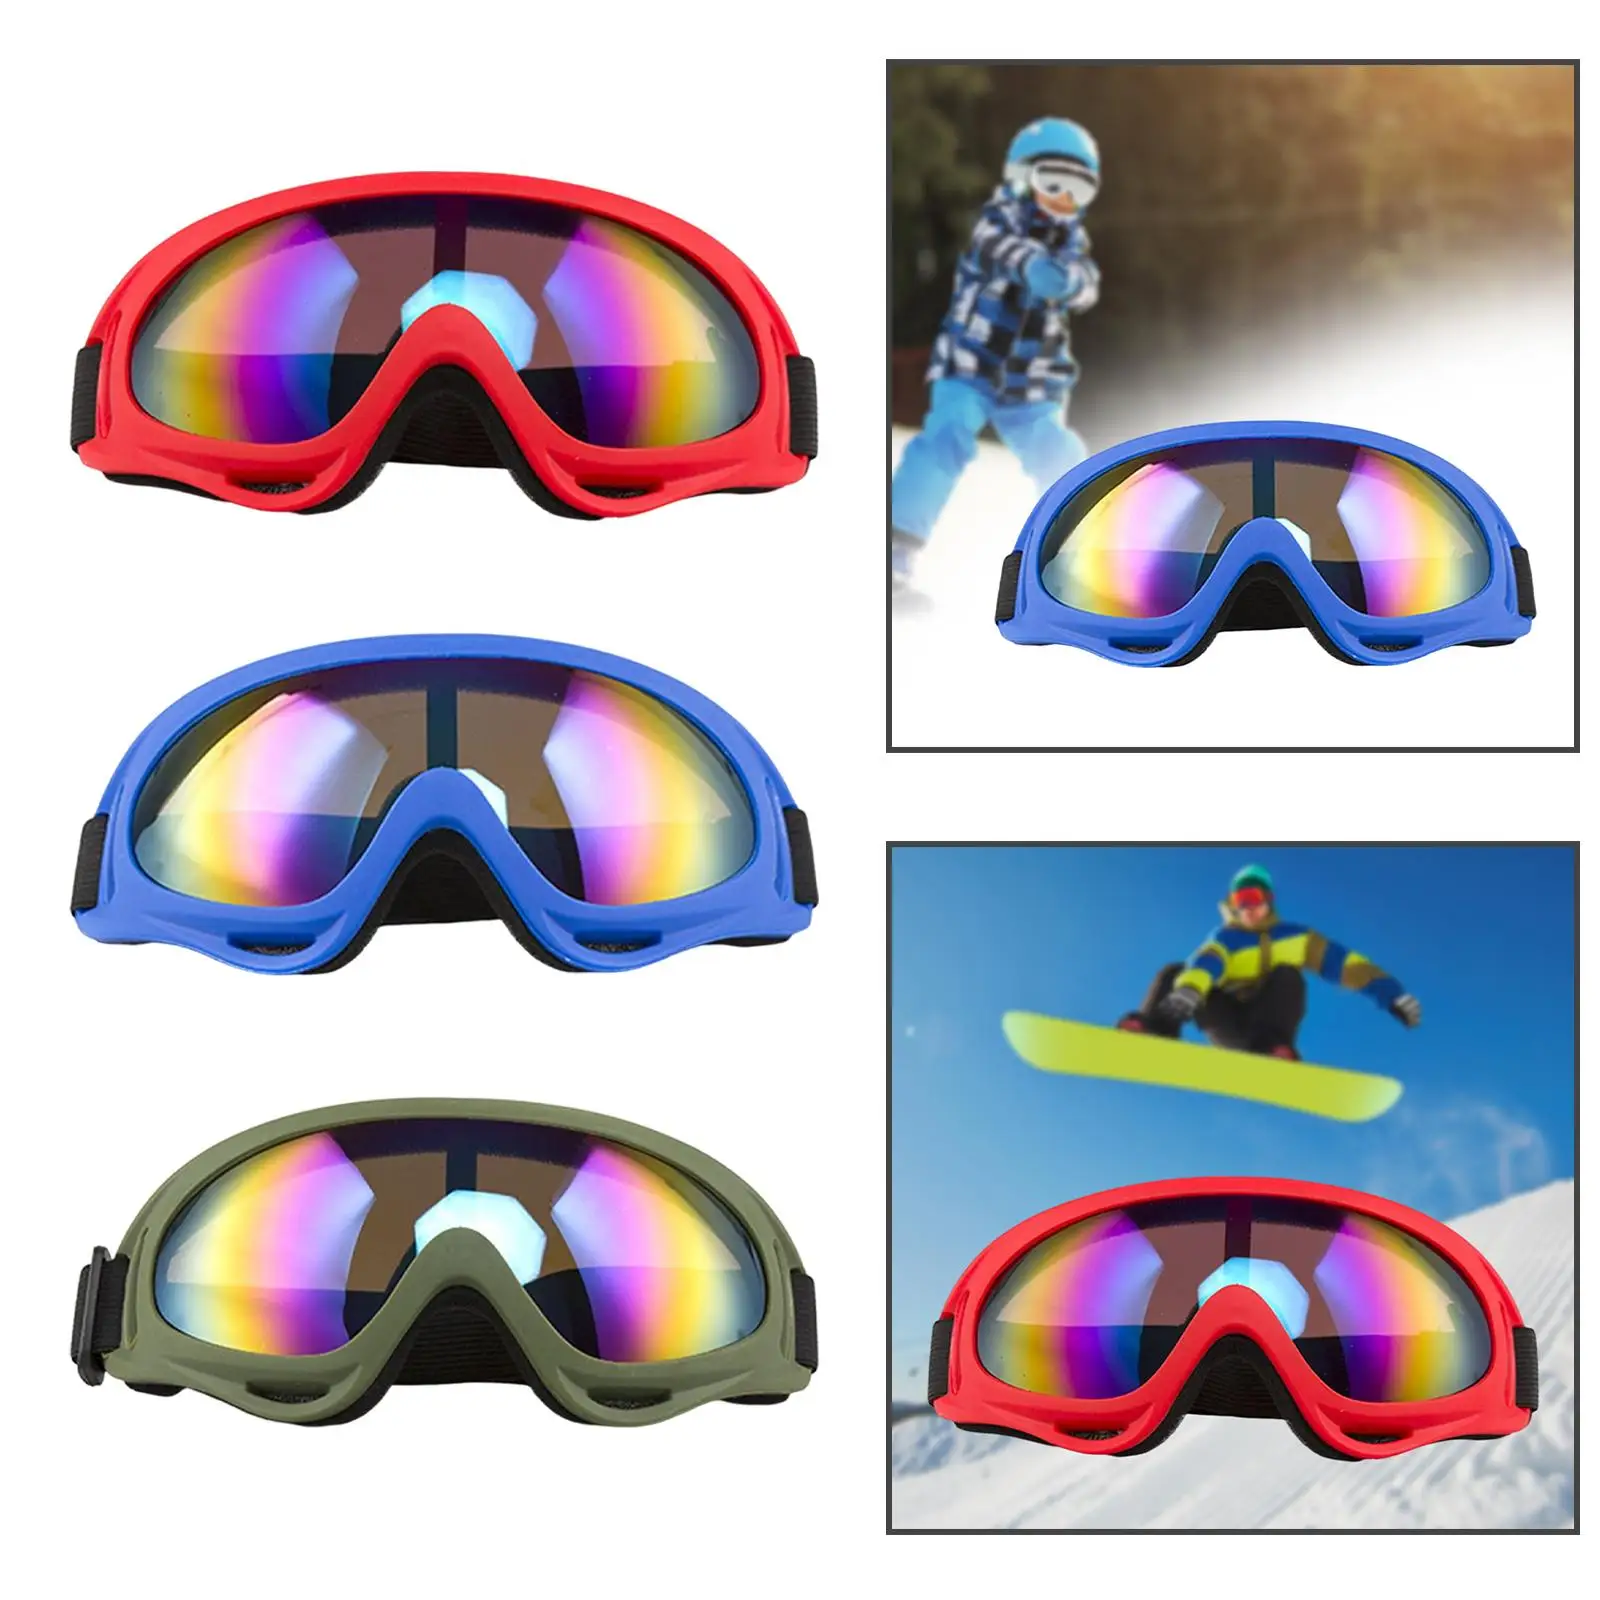 Winter Sports Ski Goggles with Adjustable Strap Dustproof for Unisex Cycling